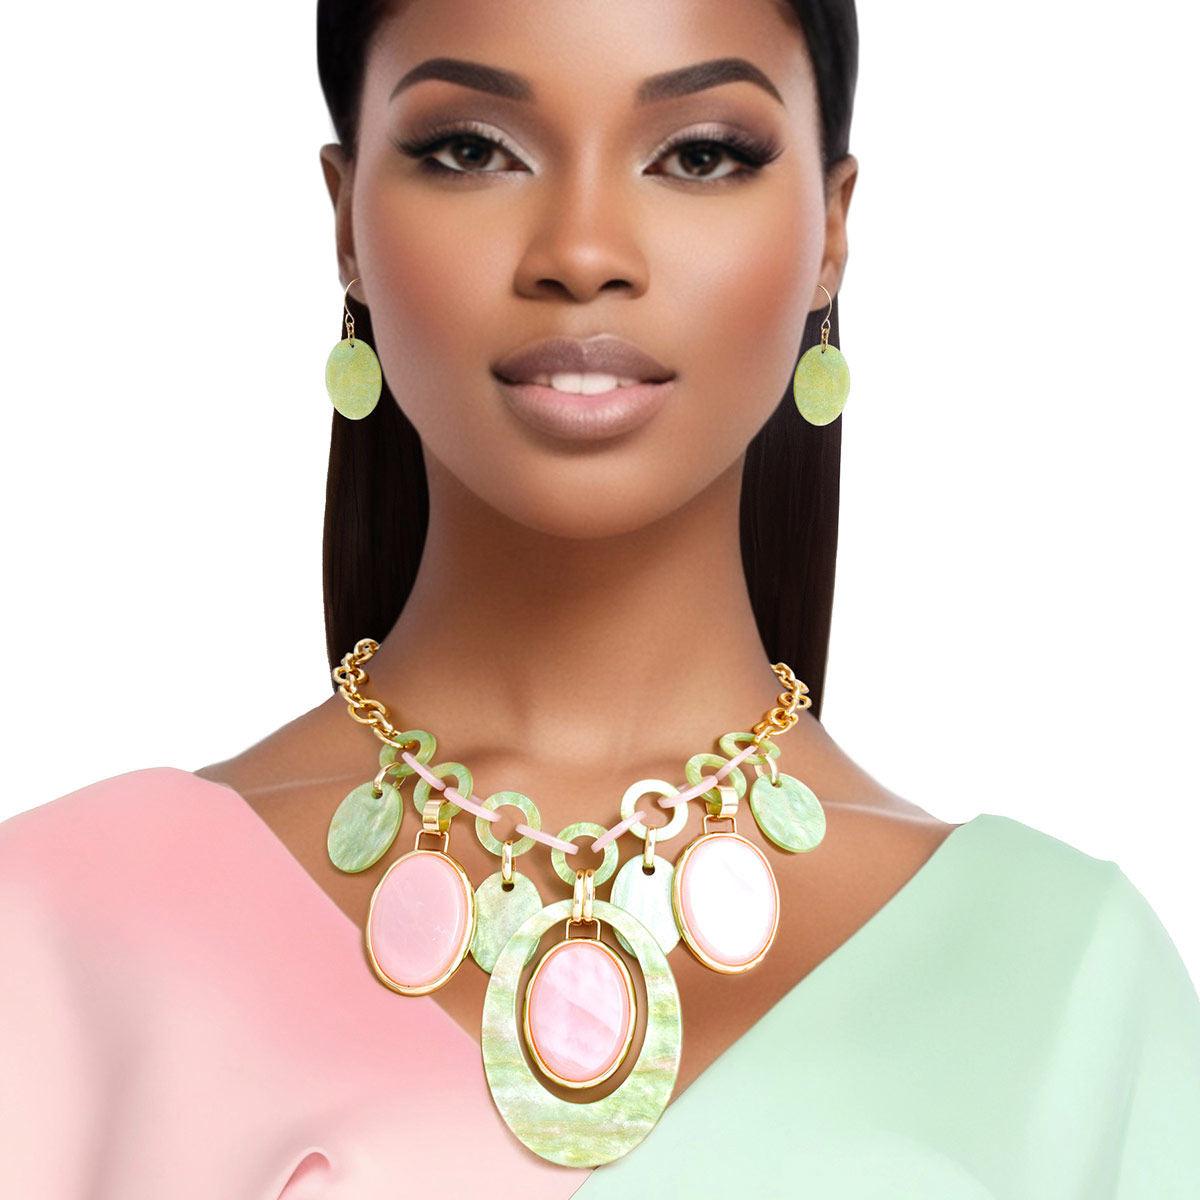 Pink Green Oval Charms Necklace Set - Artisanal Fashion Jewelry